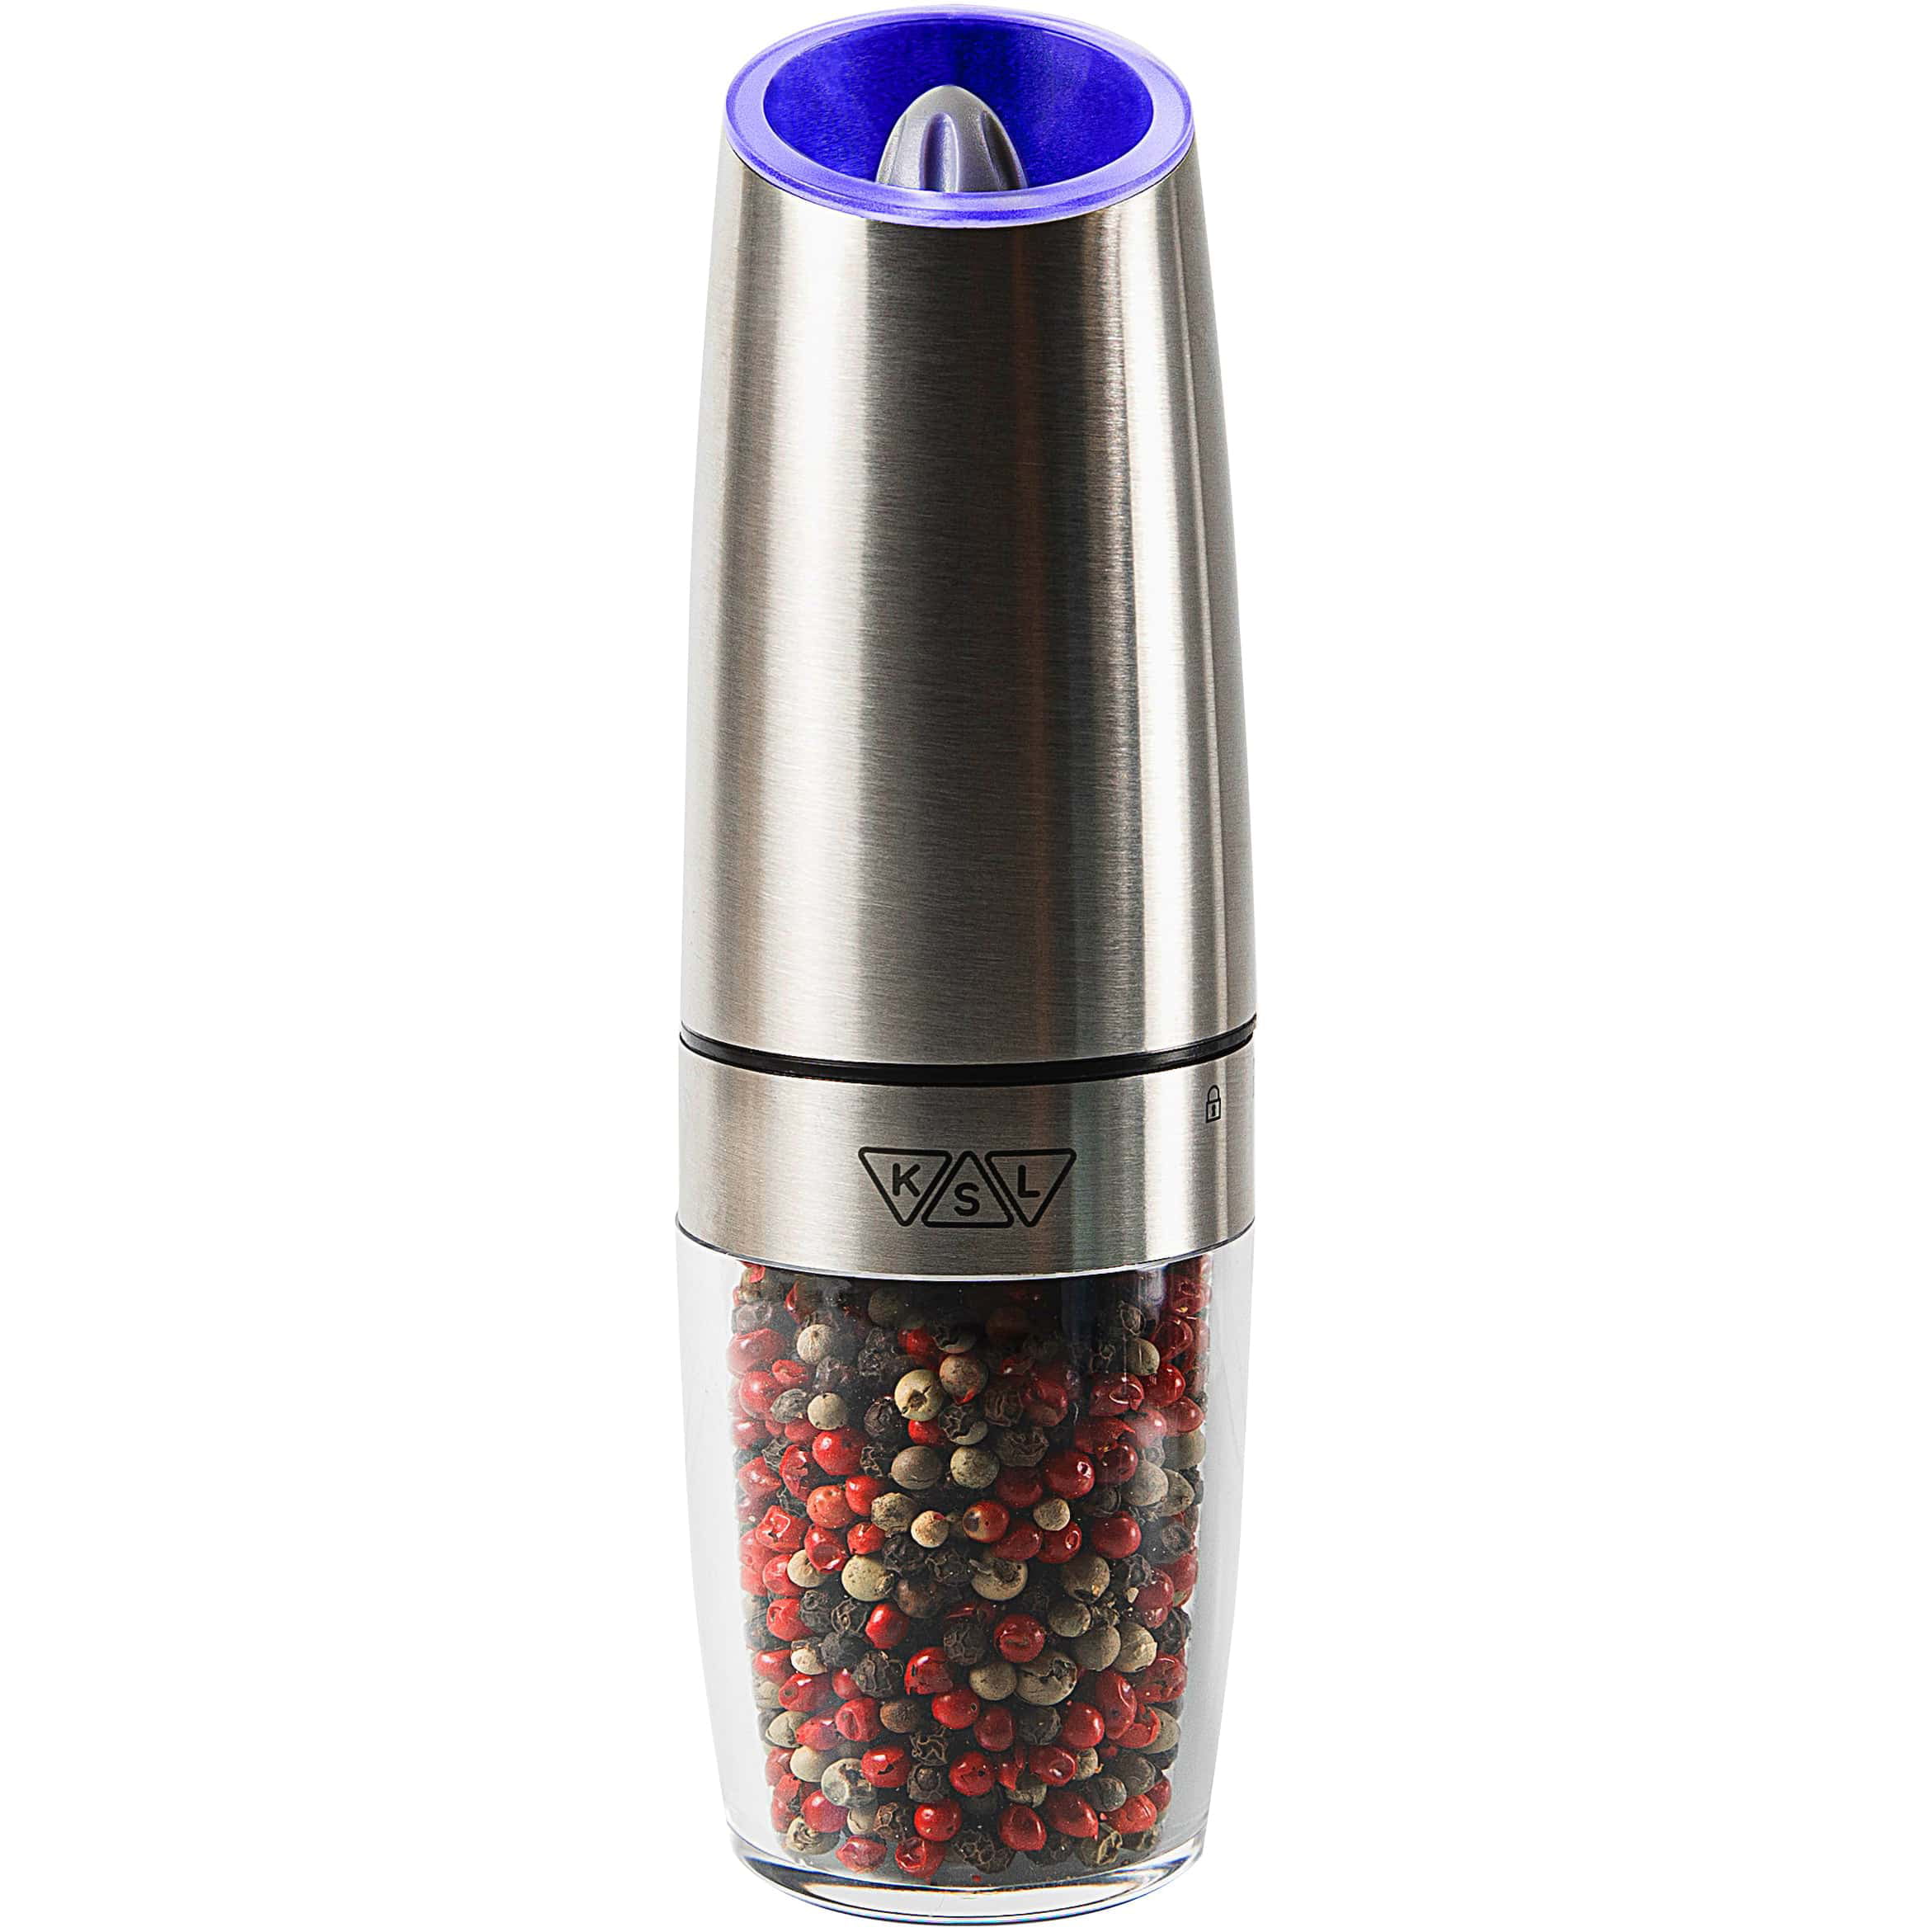 LaGoldoo Salt and Pepper Gravity Grinder Set, 2pcs Electric Pepper and Salt Mill Refillable, Automatic Battery Operated Mill Kit with LED Light